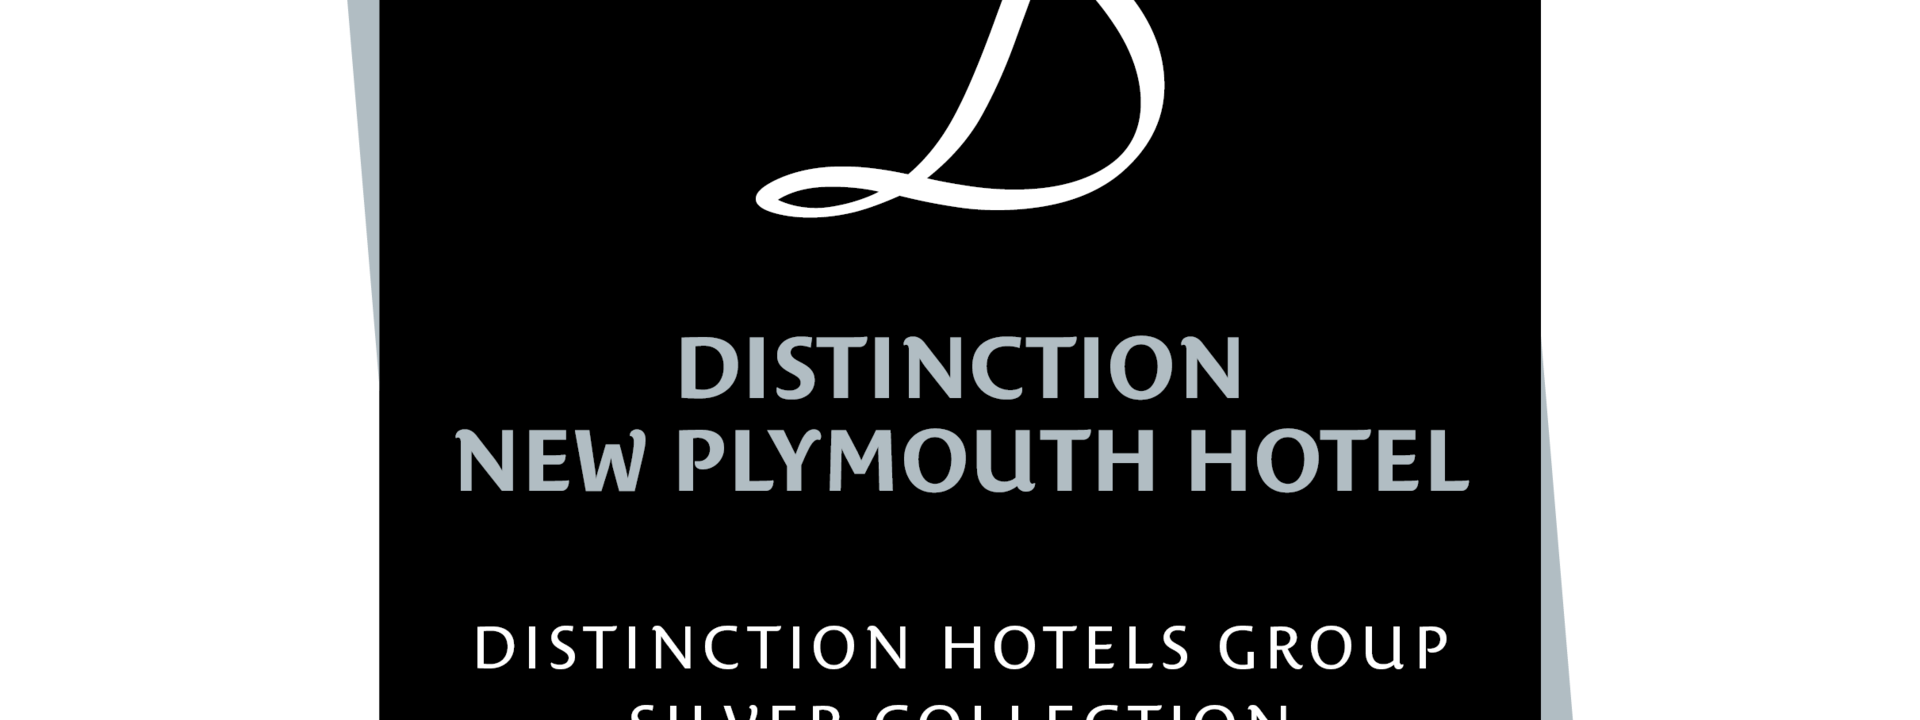 Distinction New Plymouth Hotel  Logo4 PNG.png